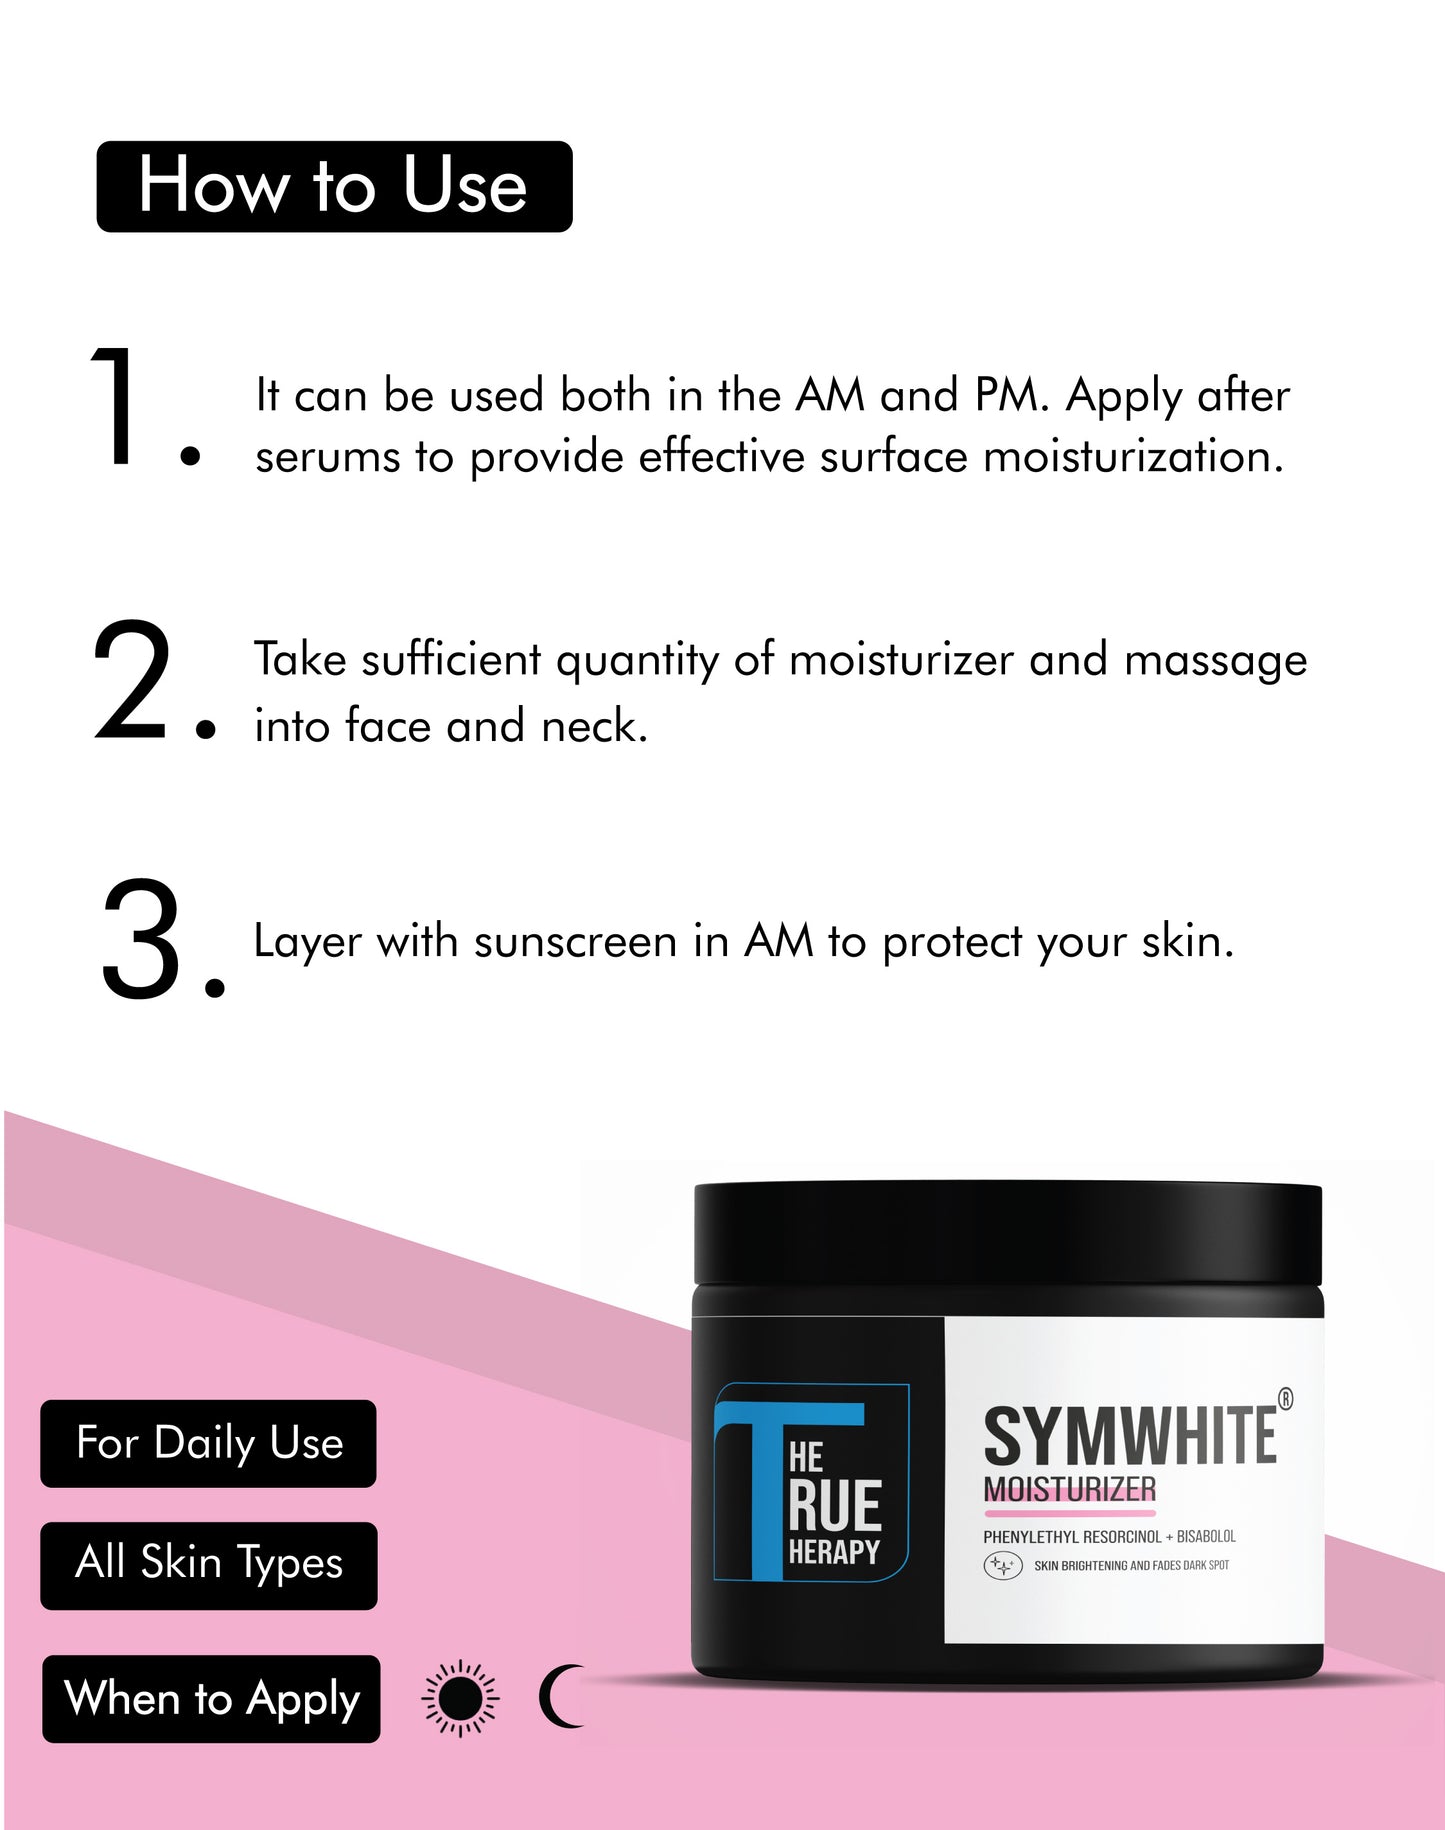 SYMWHITE MOISTURIZER - How To Use - The True Therapy